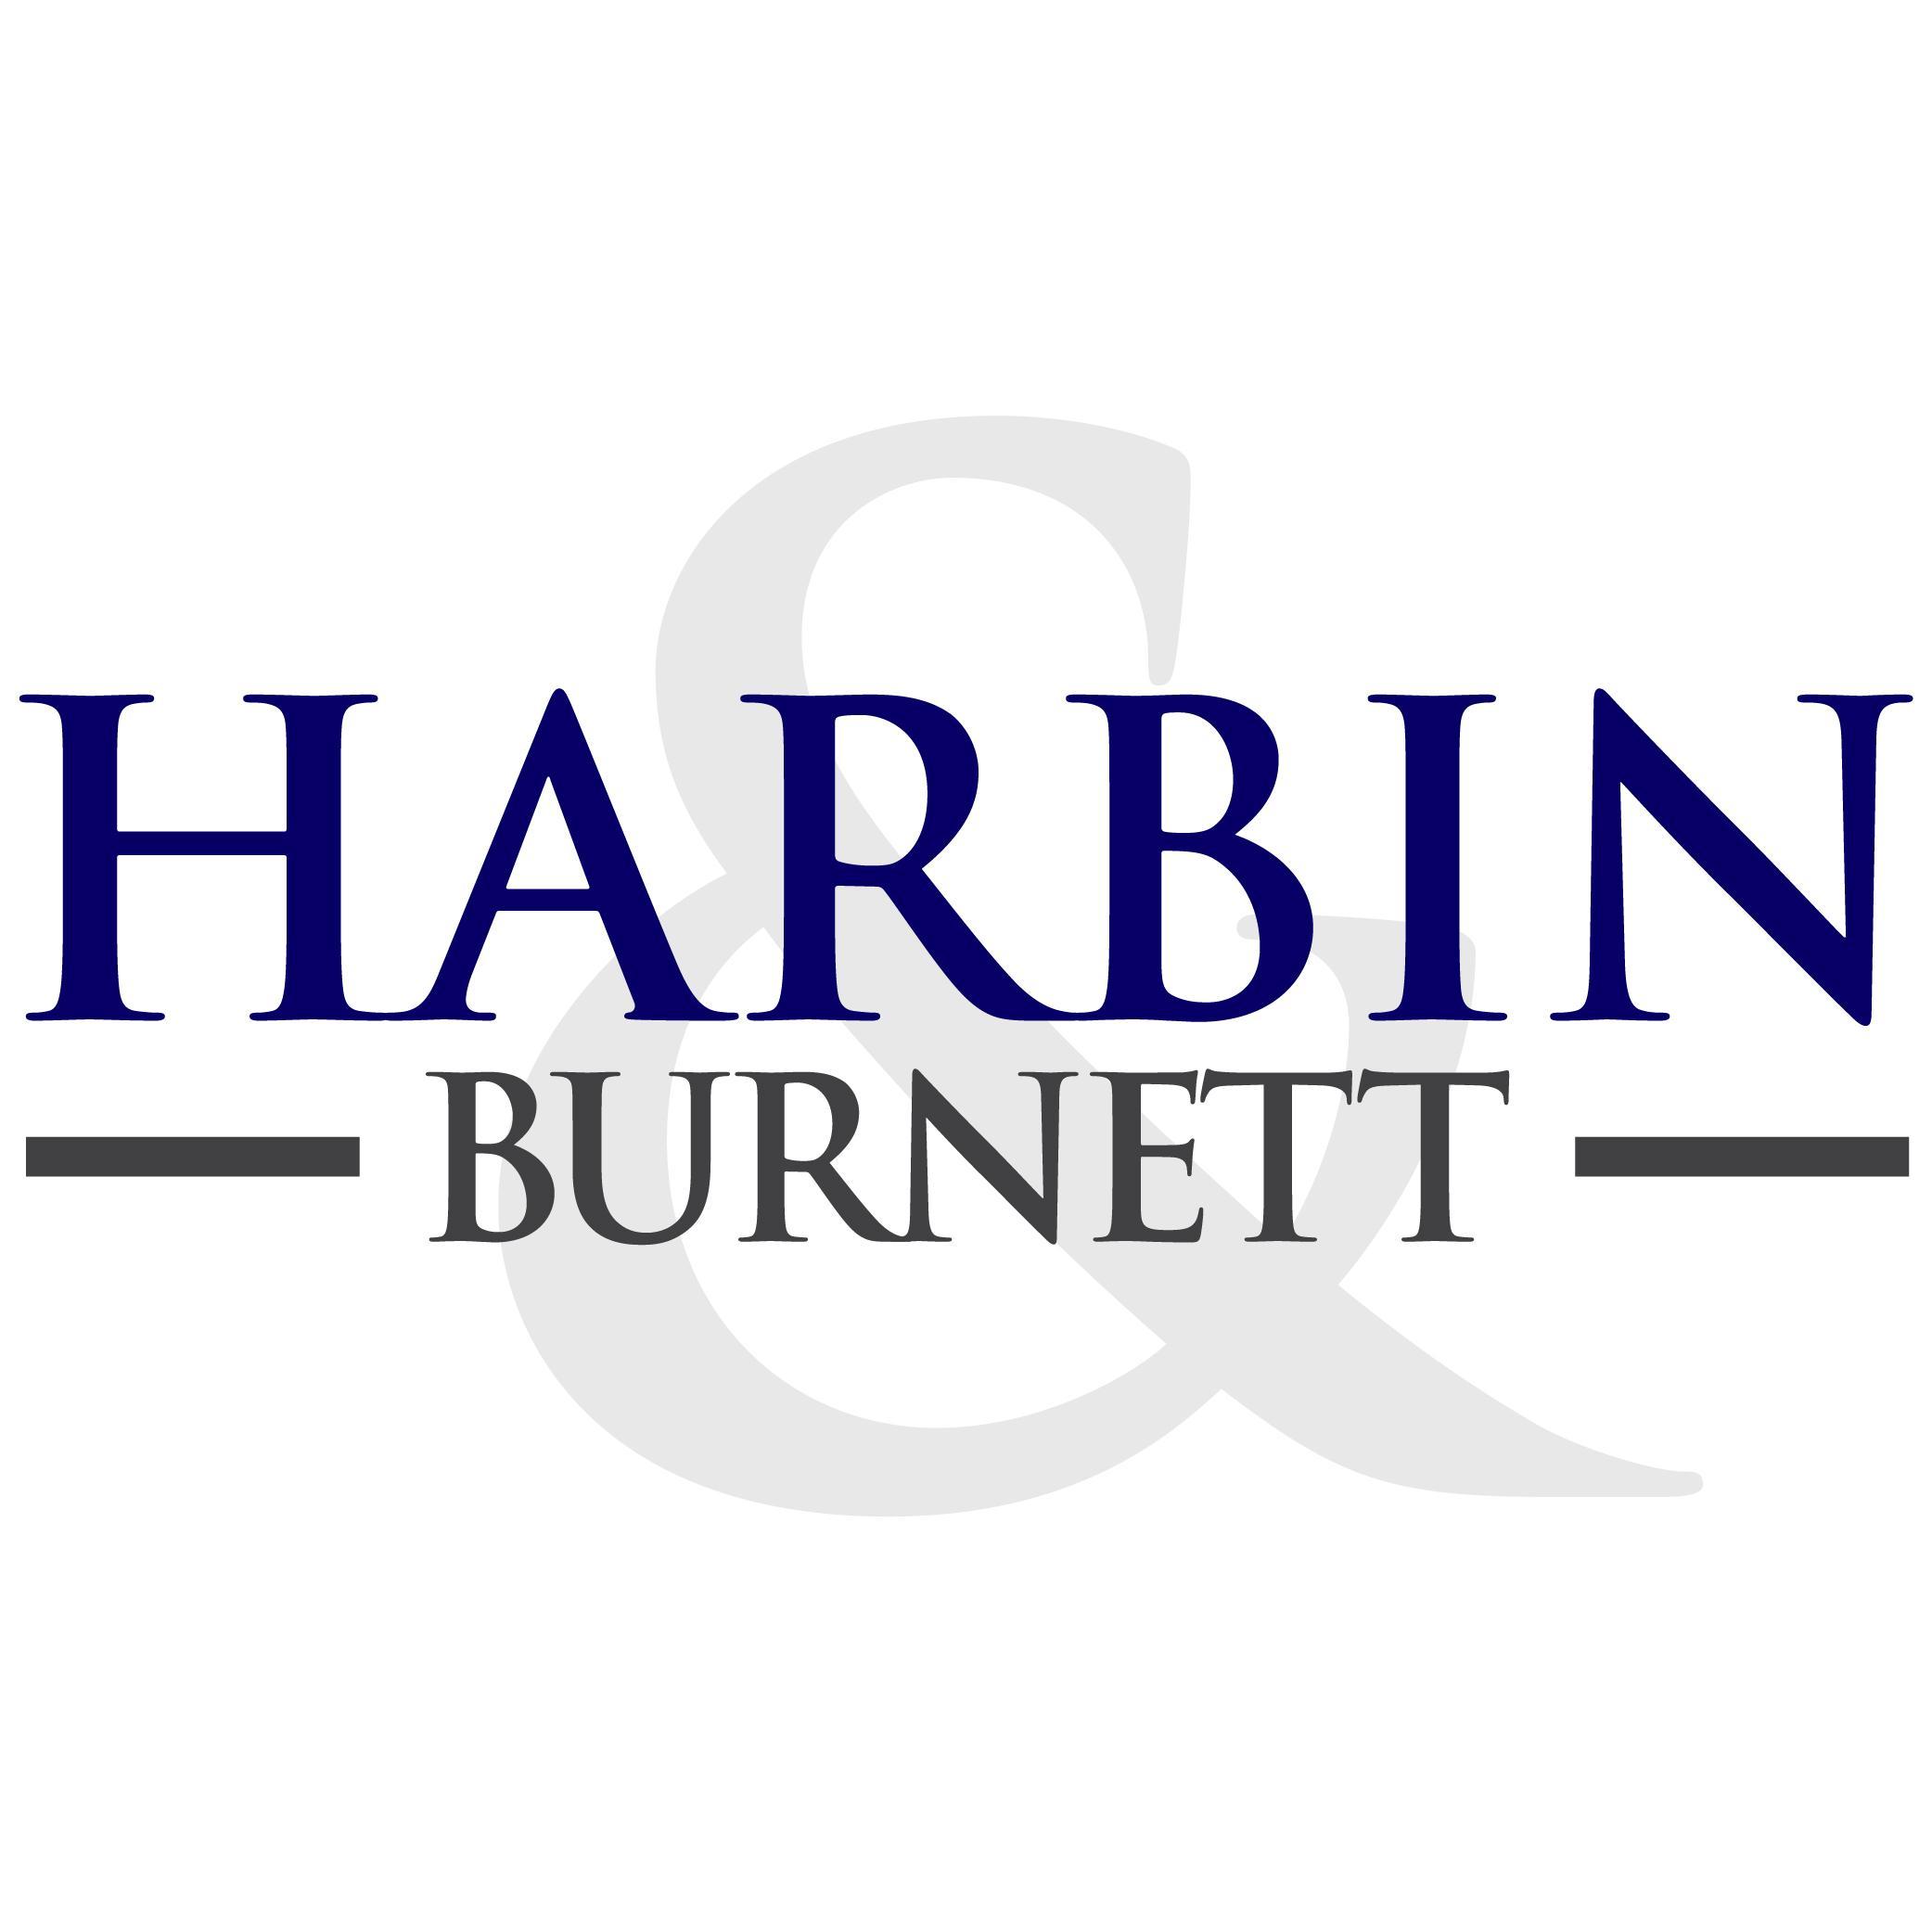 At the law offices of Harbin and Burnett, LLP we provide comprehensive legal counsel for injury victims throughout South Carolina. 864-964-0333 or 800-671-1158